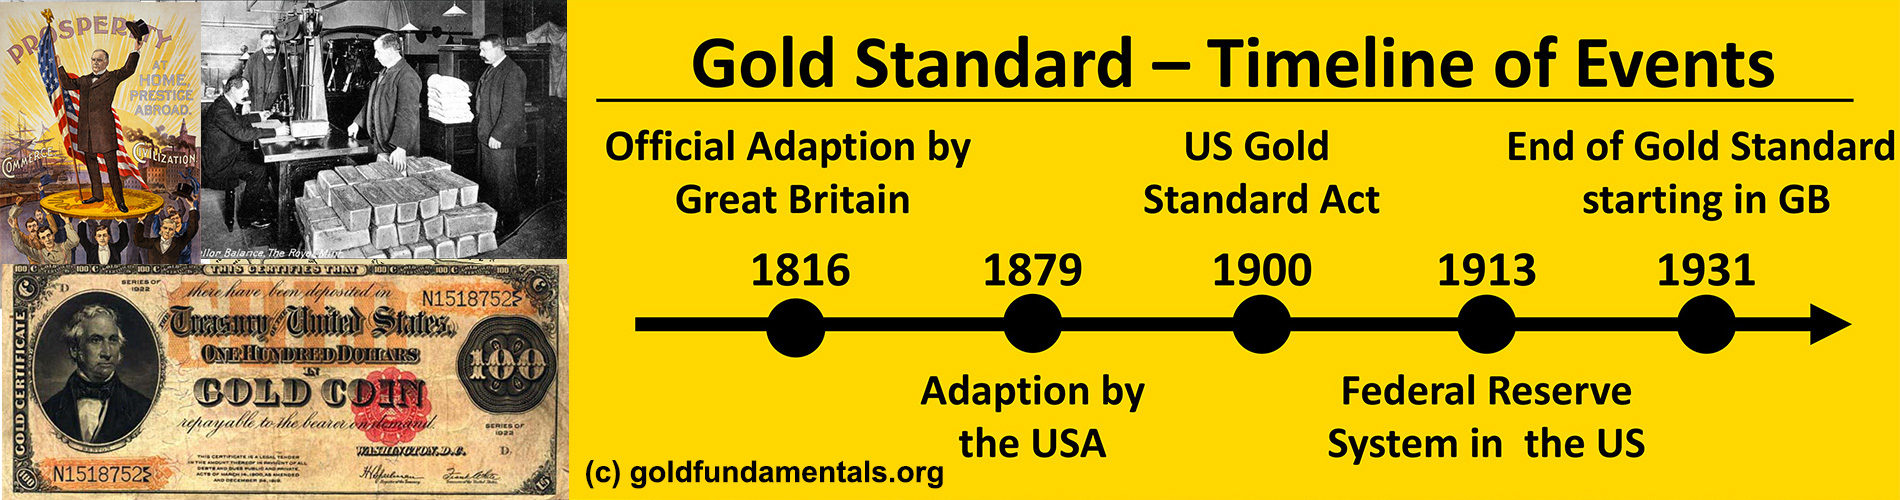 Gold Standard History - Overview of Main Events